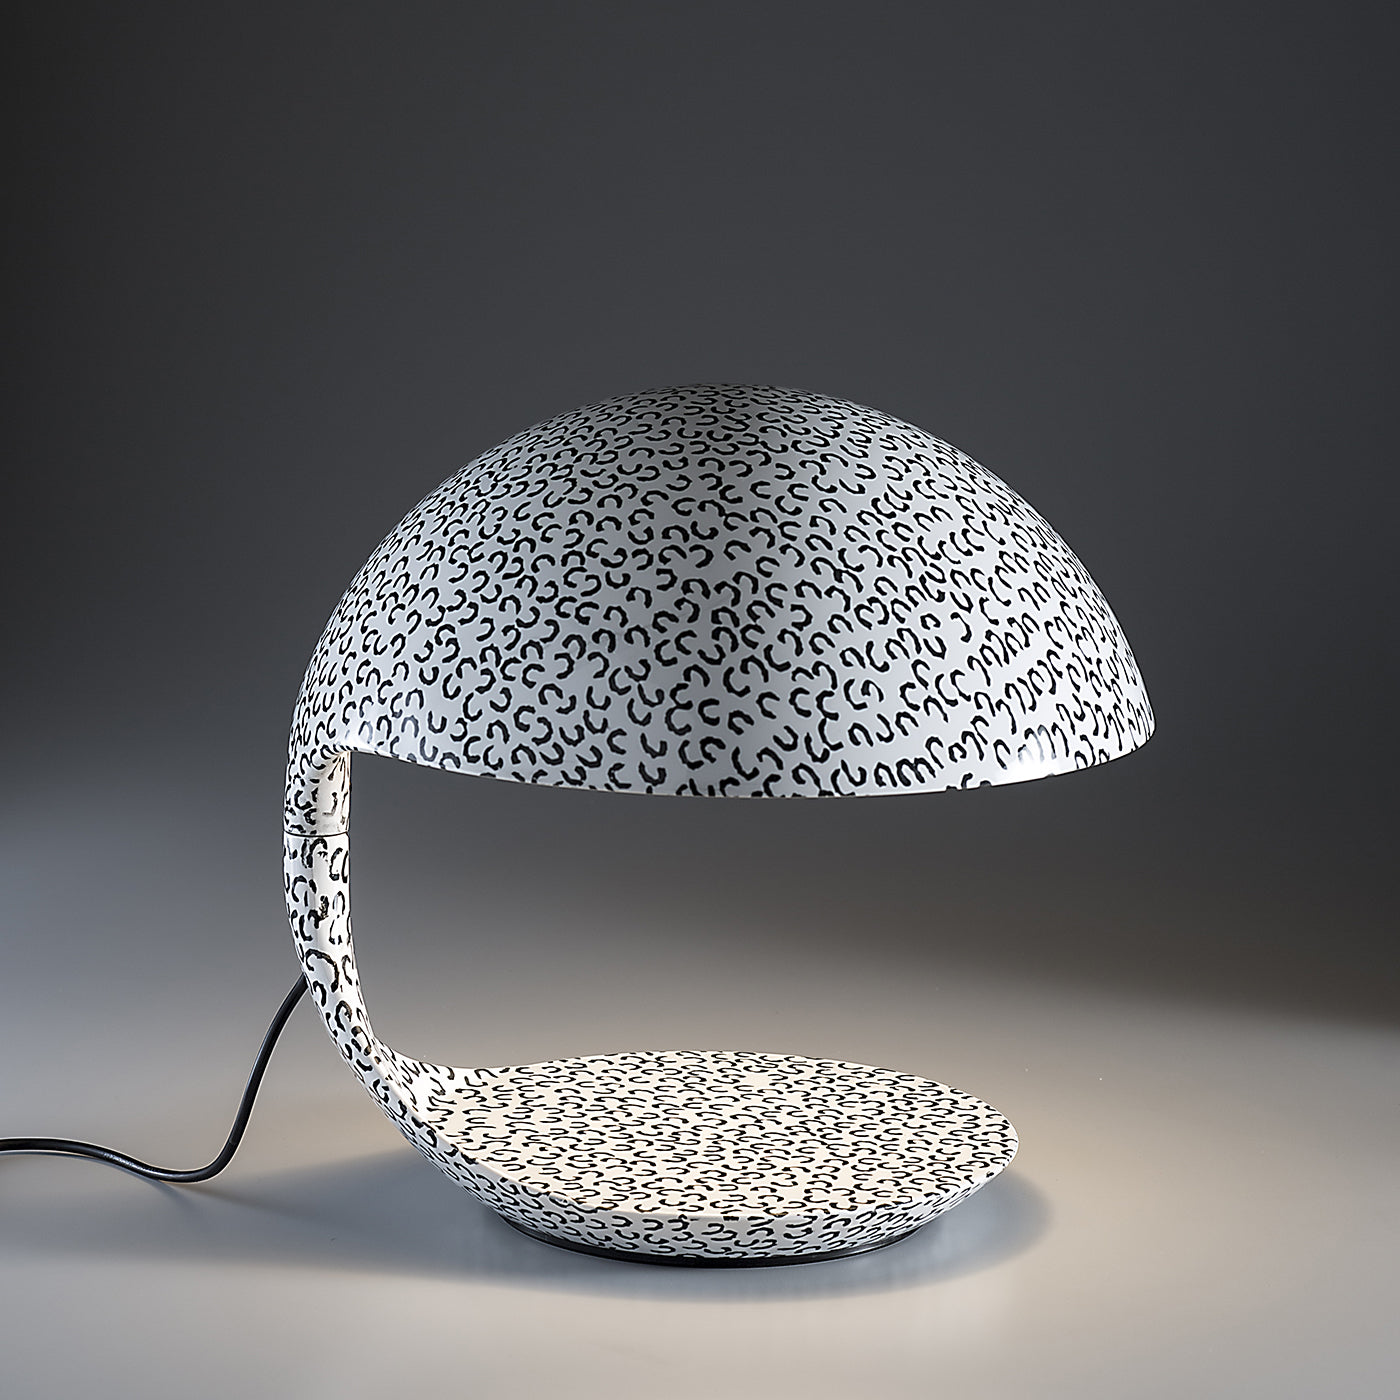 Cobra Texture Black-And-White Table Lamp by Paola Navone - Alternative view 3